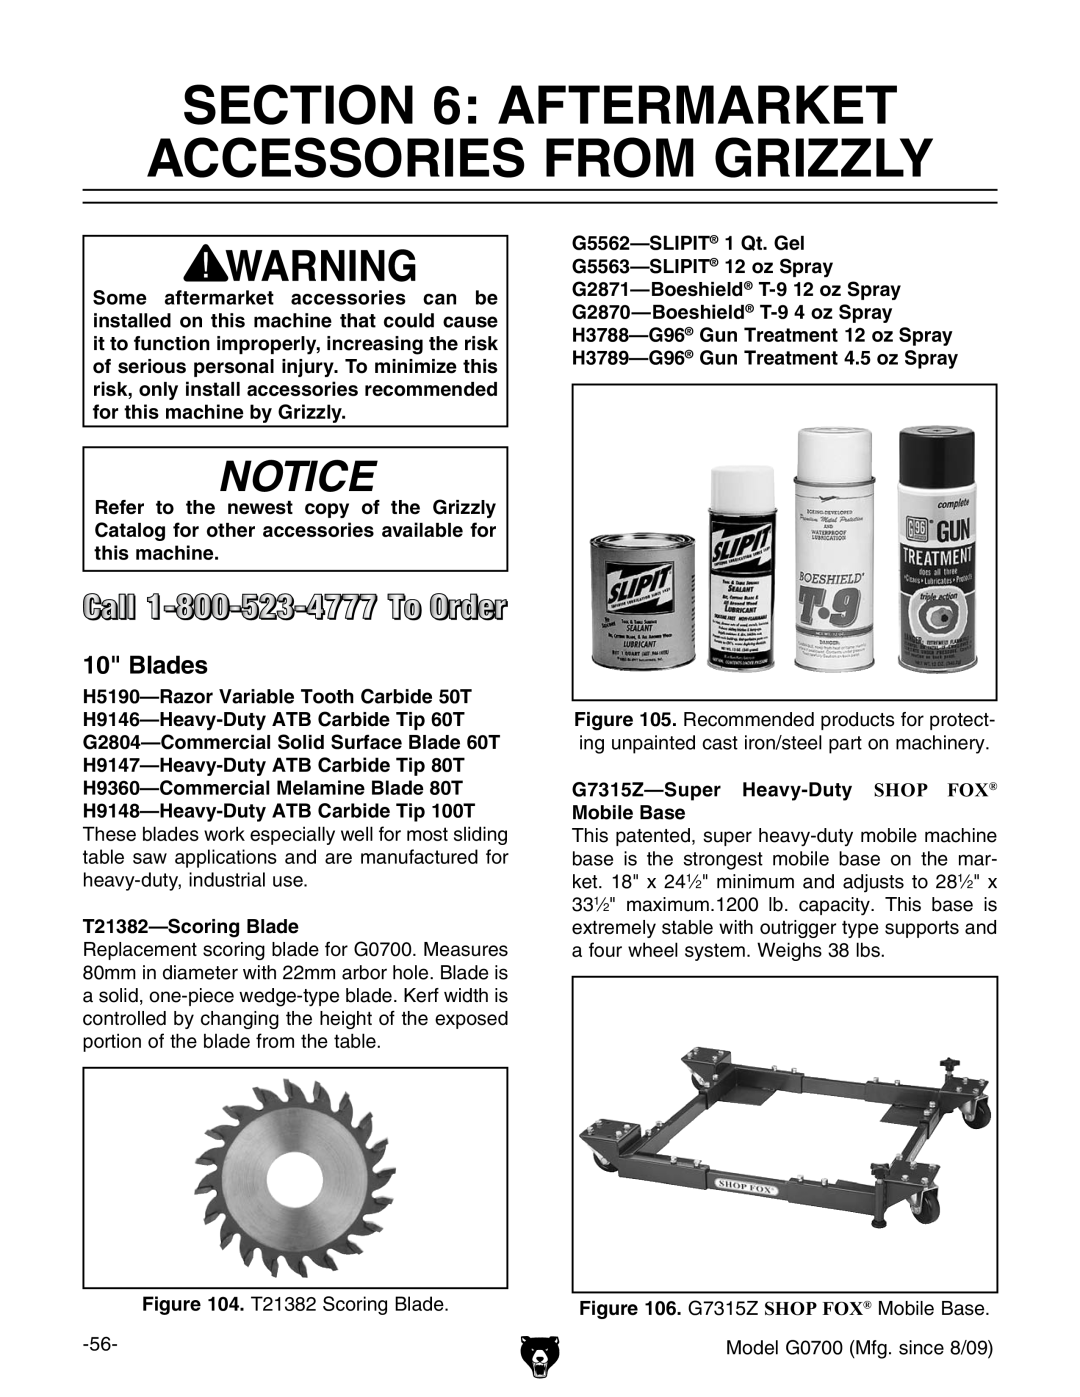 Grizzly G0700 owner manual Aftermarket Accessories From Grizzly, Blades 